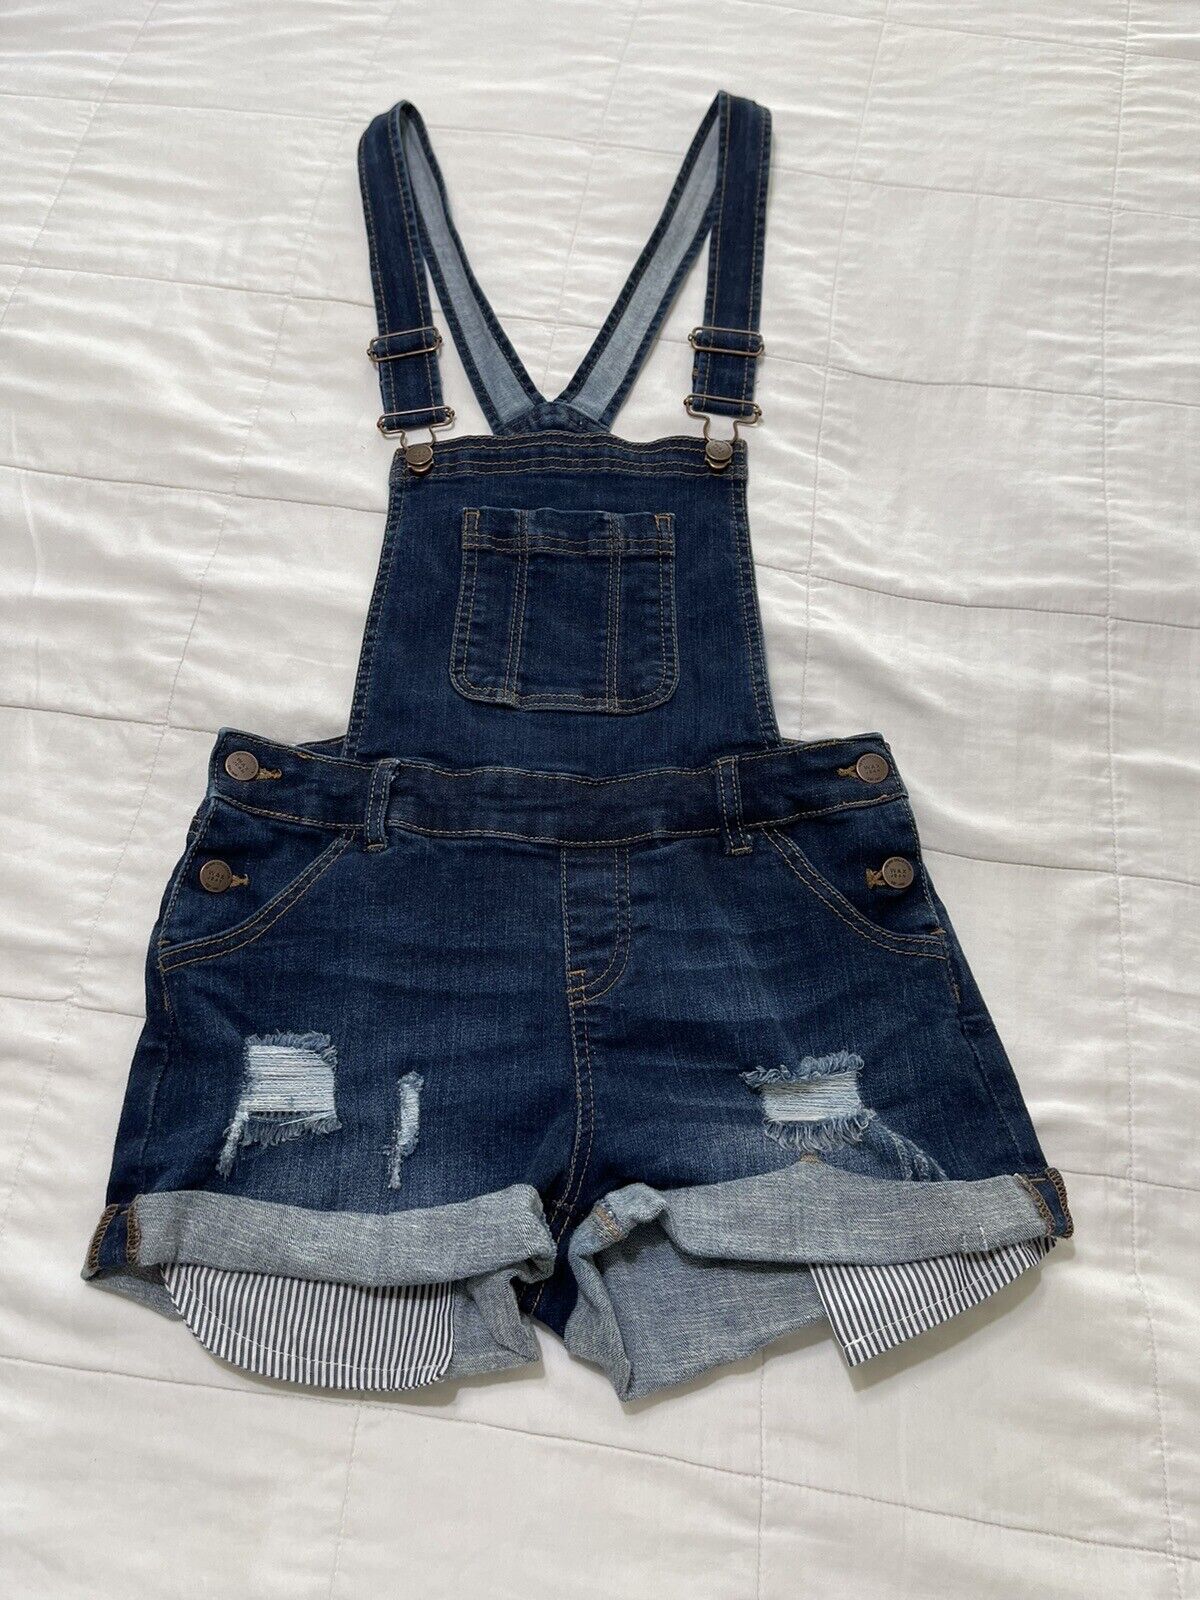 Basic Denim Wax Jean Overall Shorts For Women - image 1